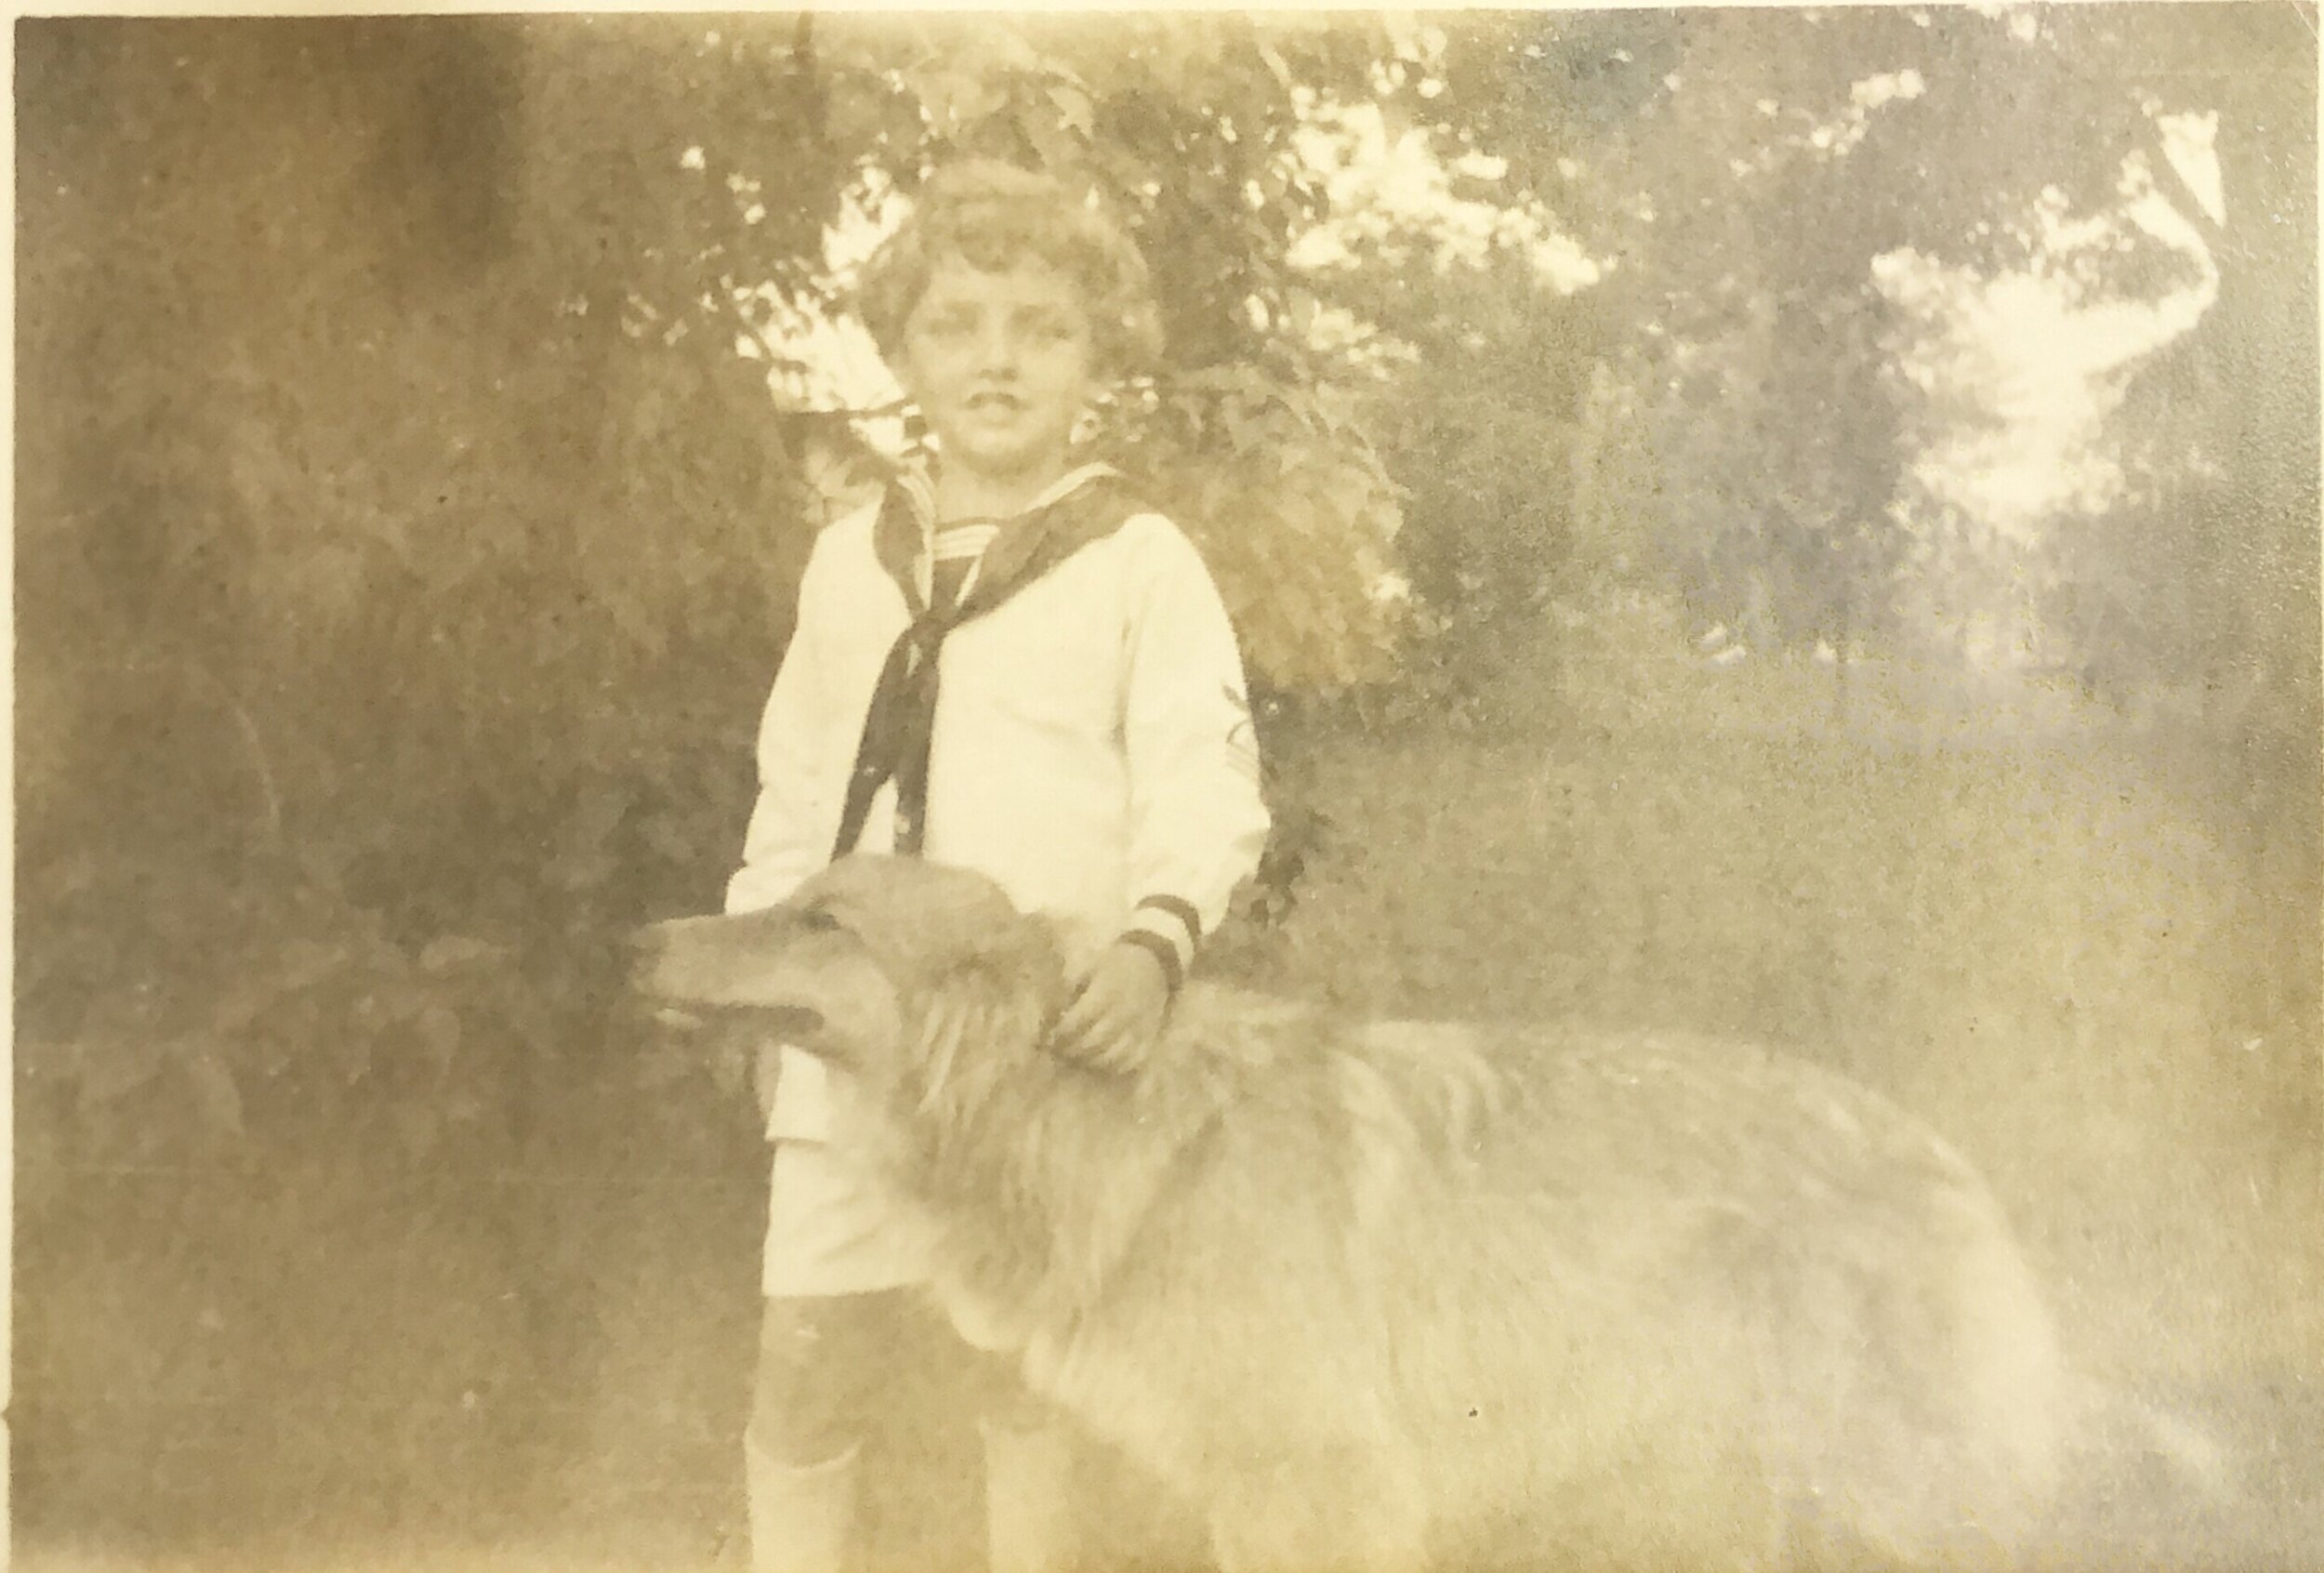  Sandy as young boy, c early 1920s 